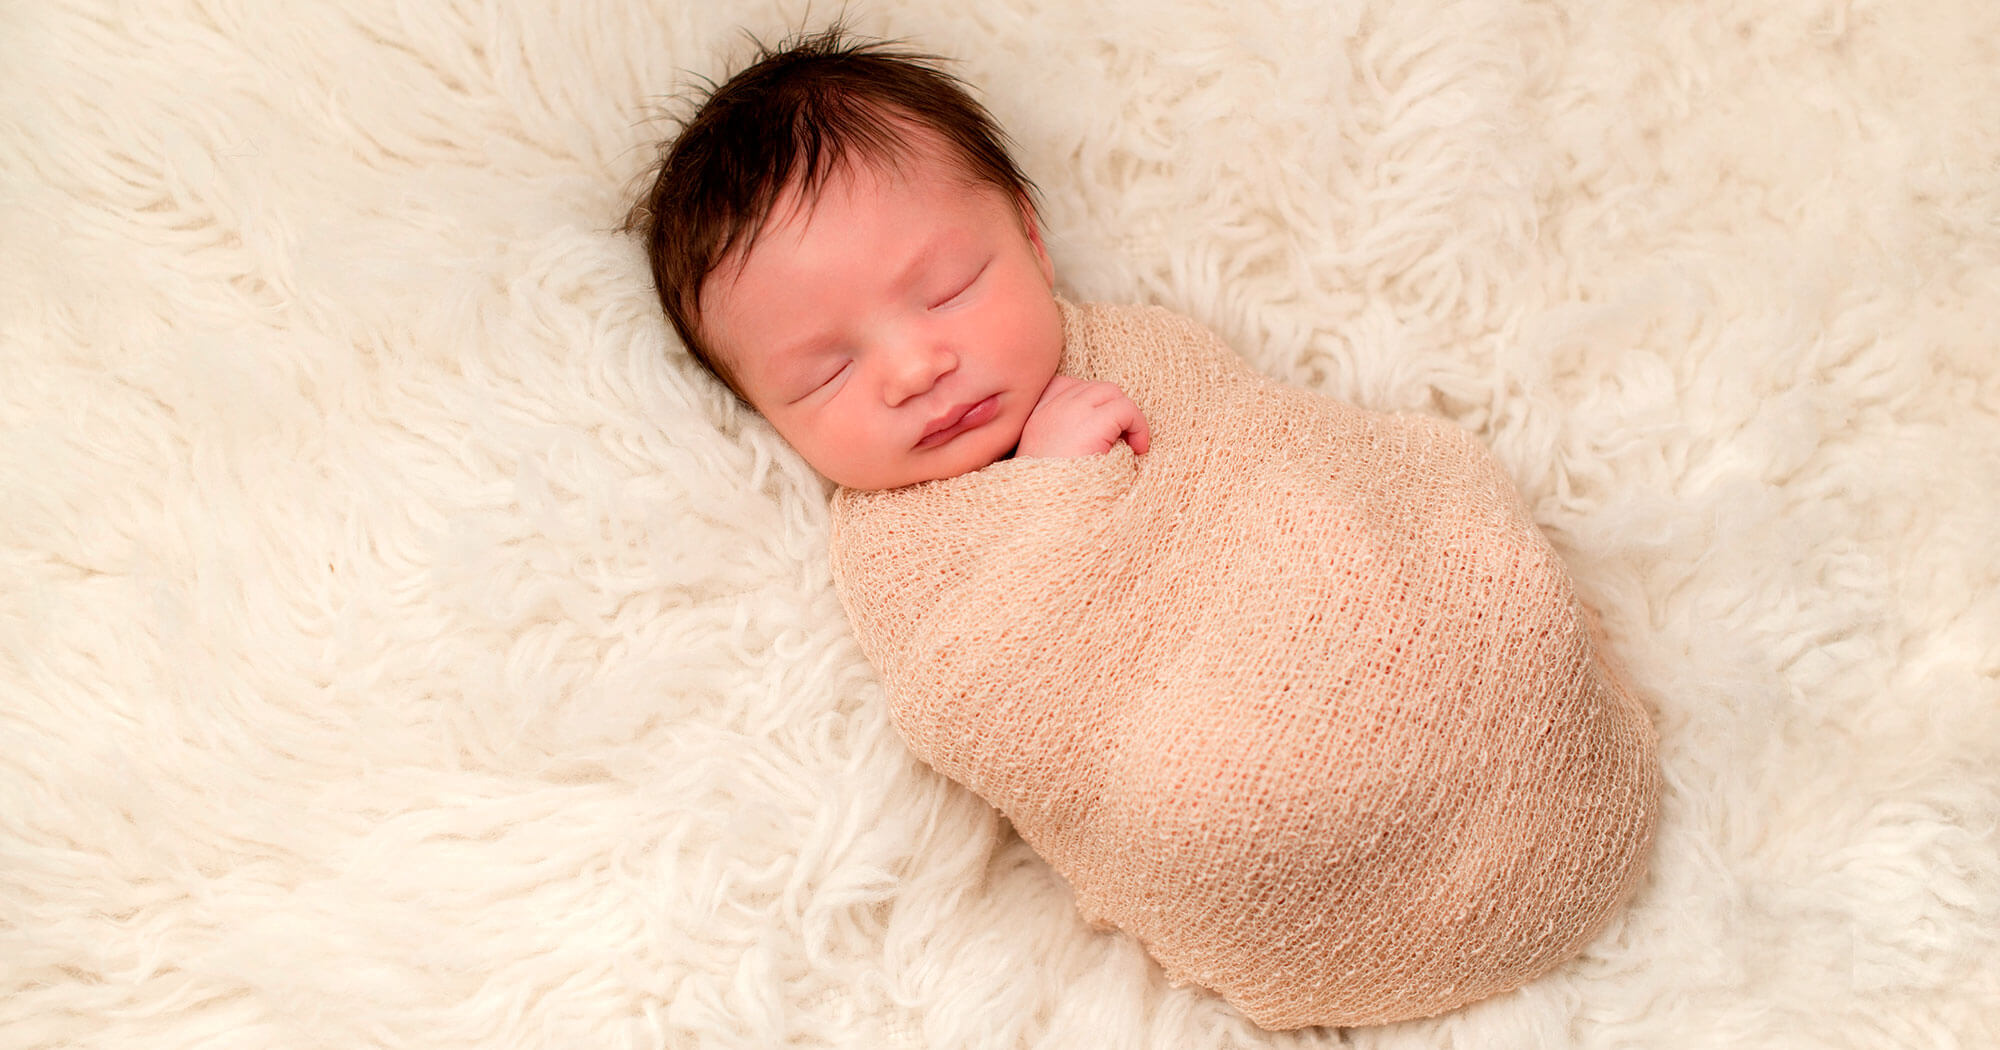 best swaddle blankets for winter